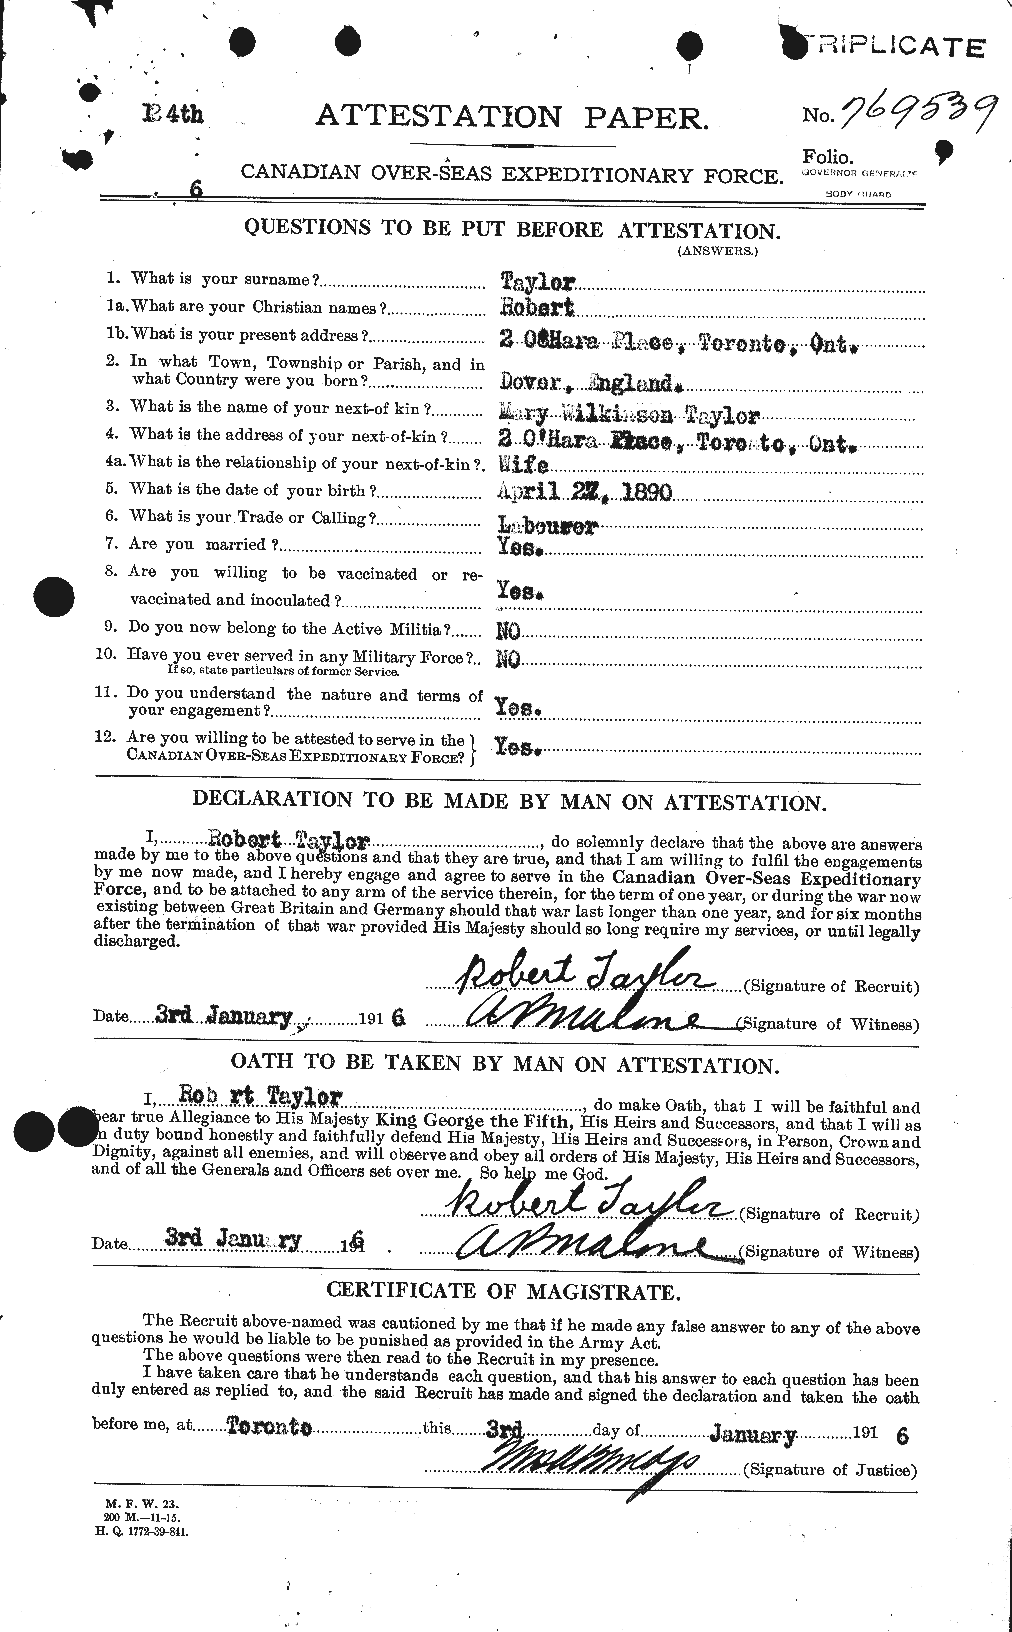 Personnel Records of the First World War - CEF 627439a